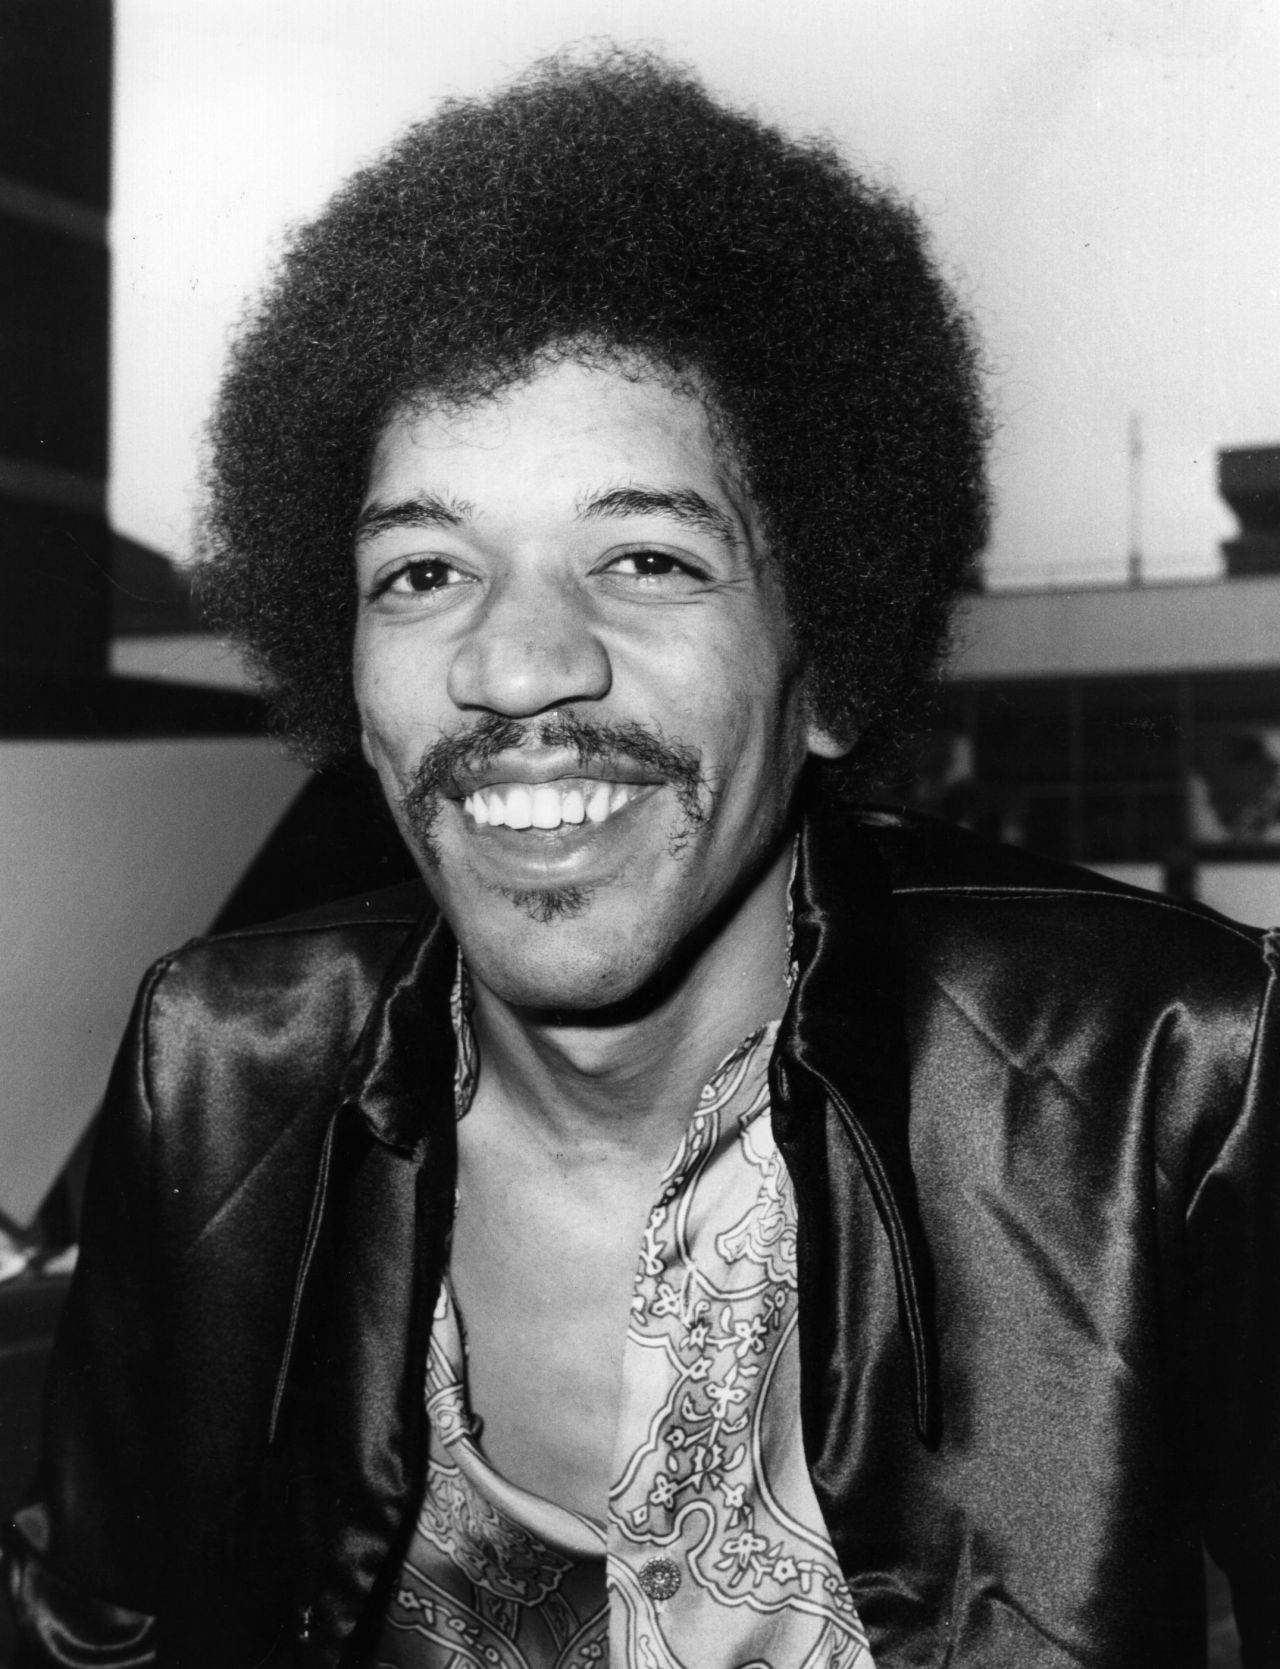 Hendrix had an uncanny ear for music, but he was deficient in another one of his five senses: his vision. He had terrible eyesight and refused to wear glasses. He once even wrecked his sports car because of his cloudy vision.